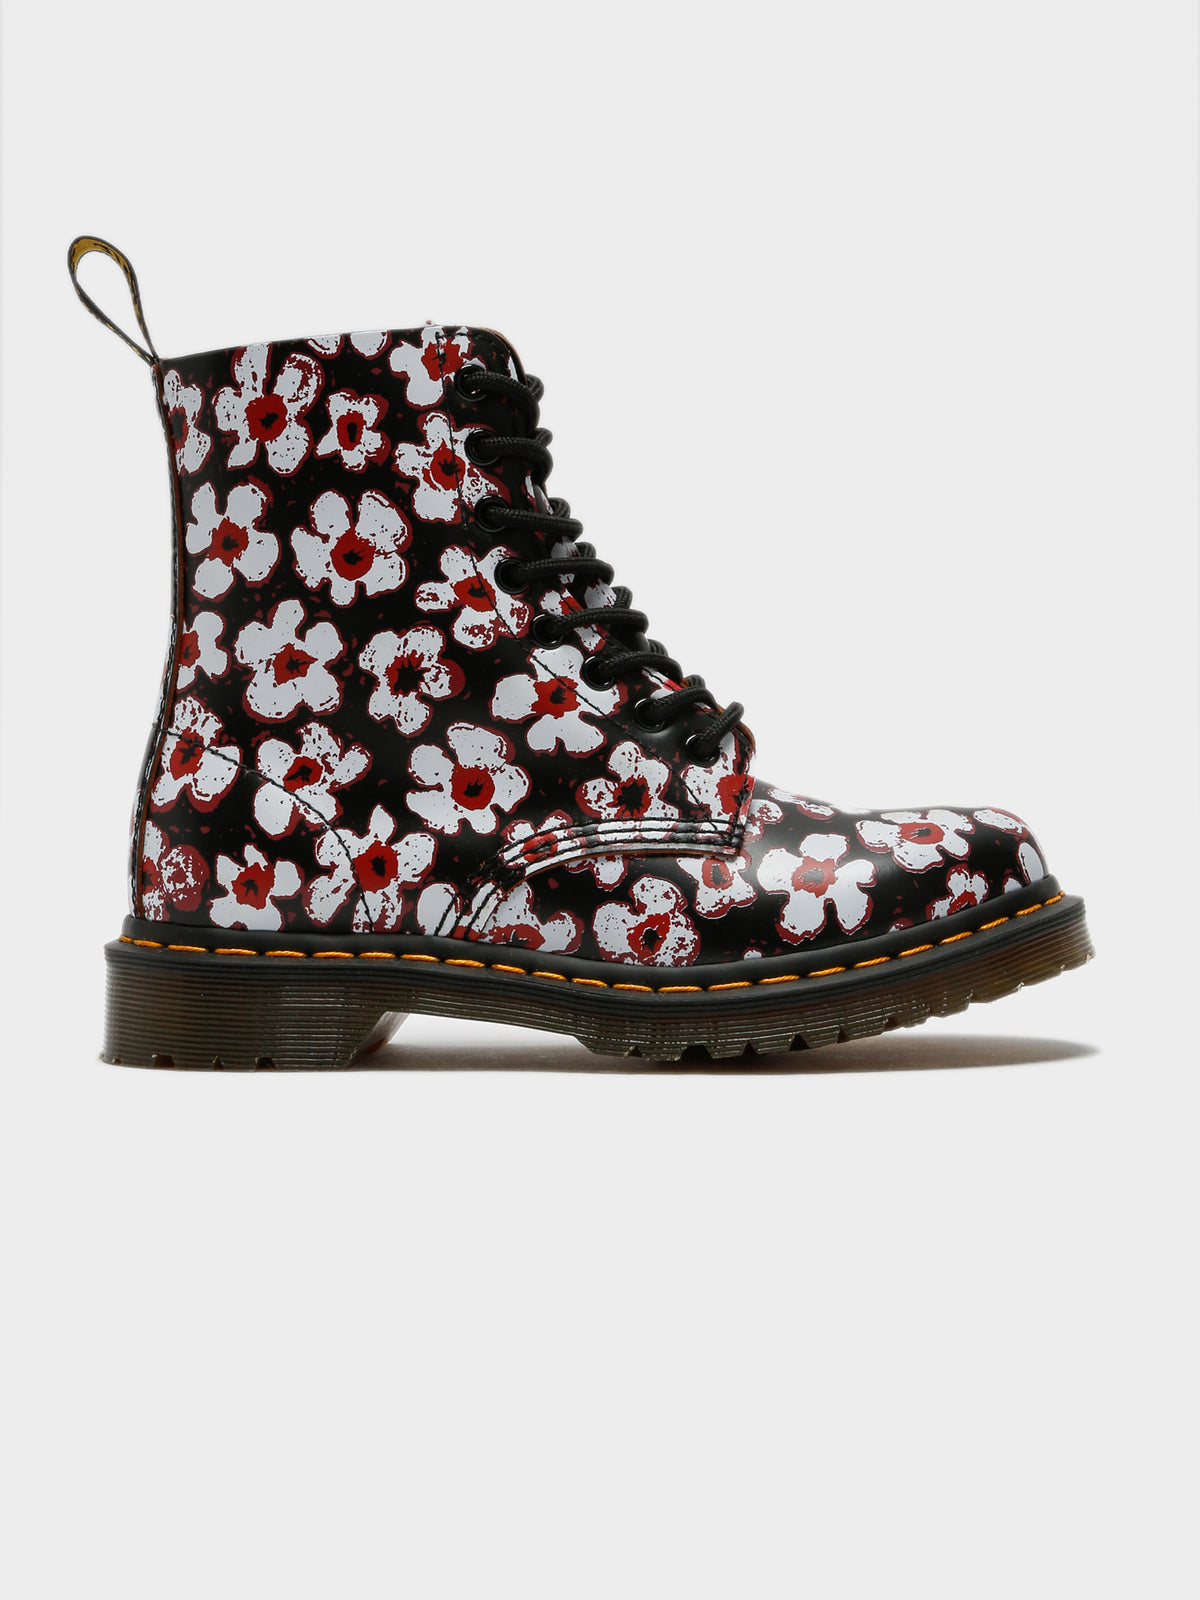 Womens 1460 Pascal 8-Eyelet Boots in Pansy Fayre Flower Print